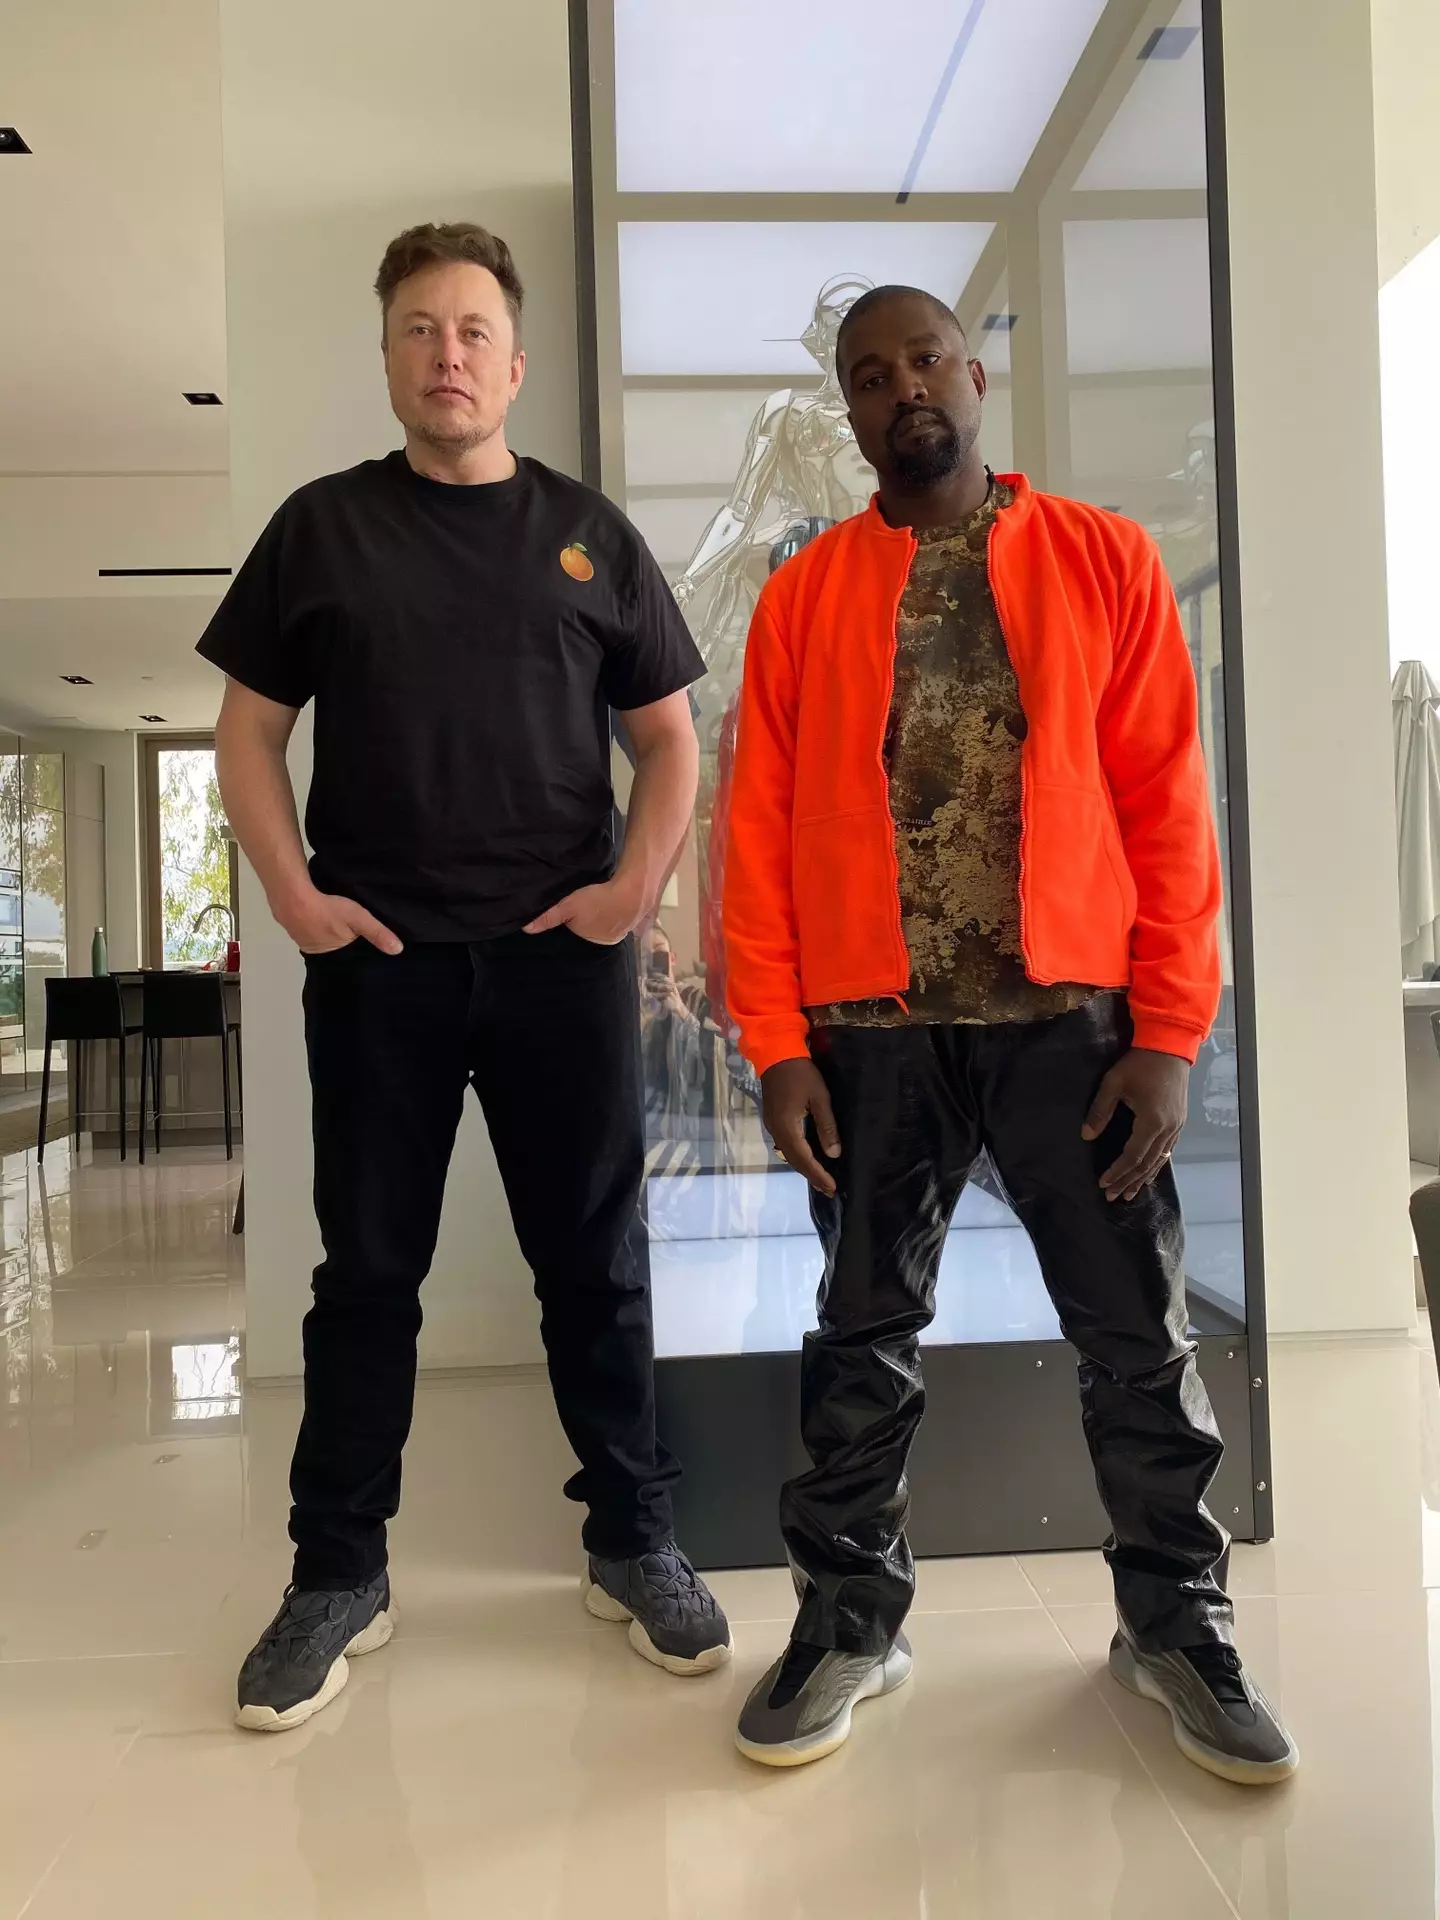 Kanye West has suggested he is autistic in a text allegedly sent to Elon Musk.